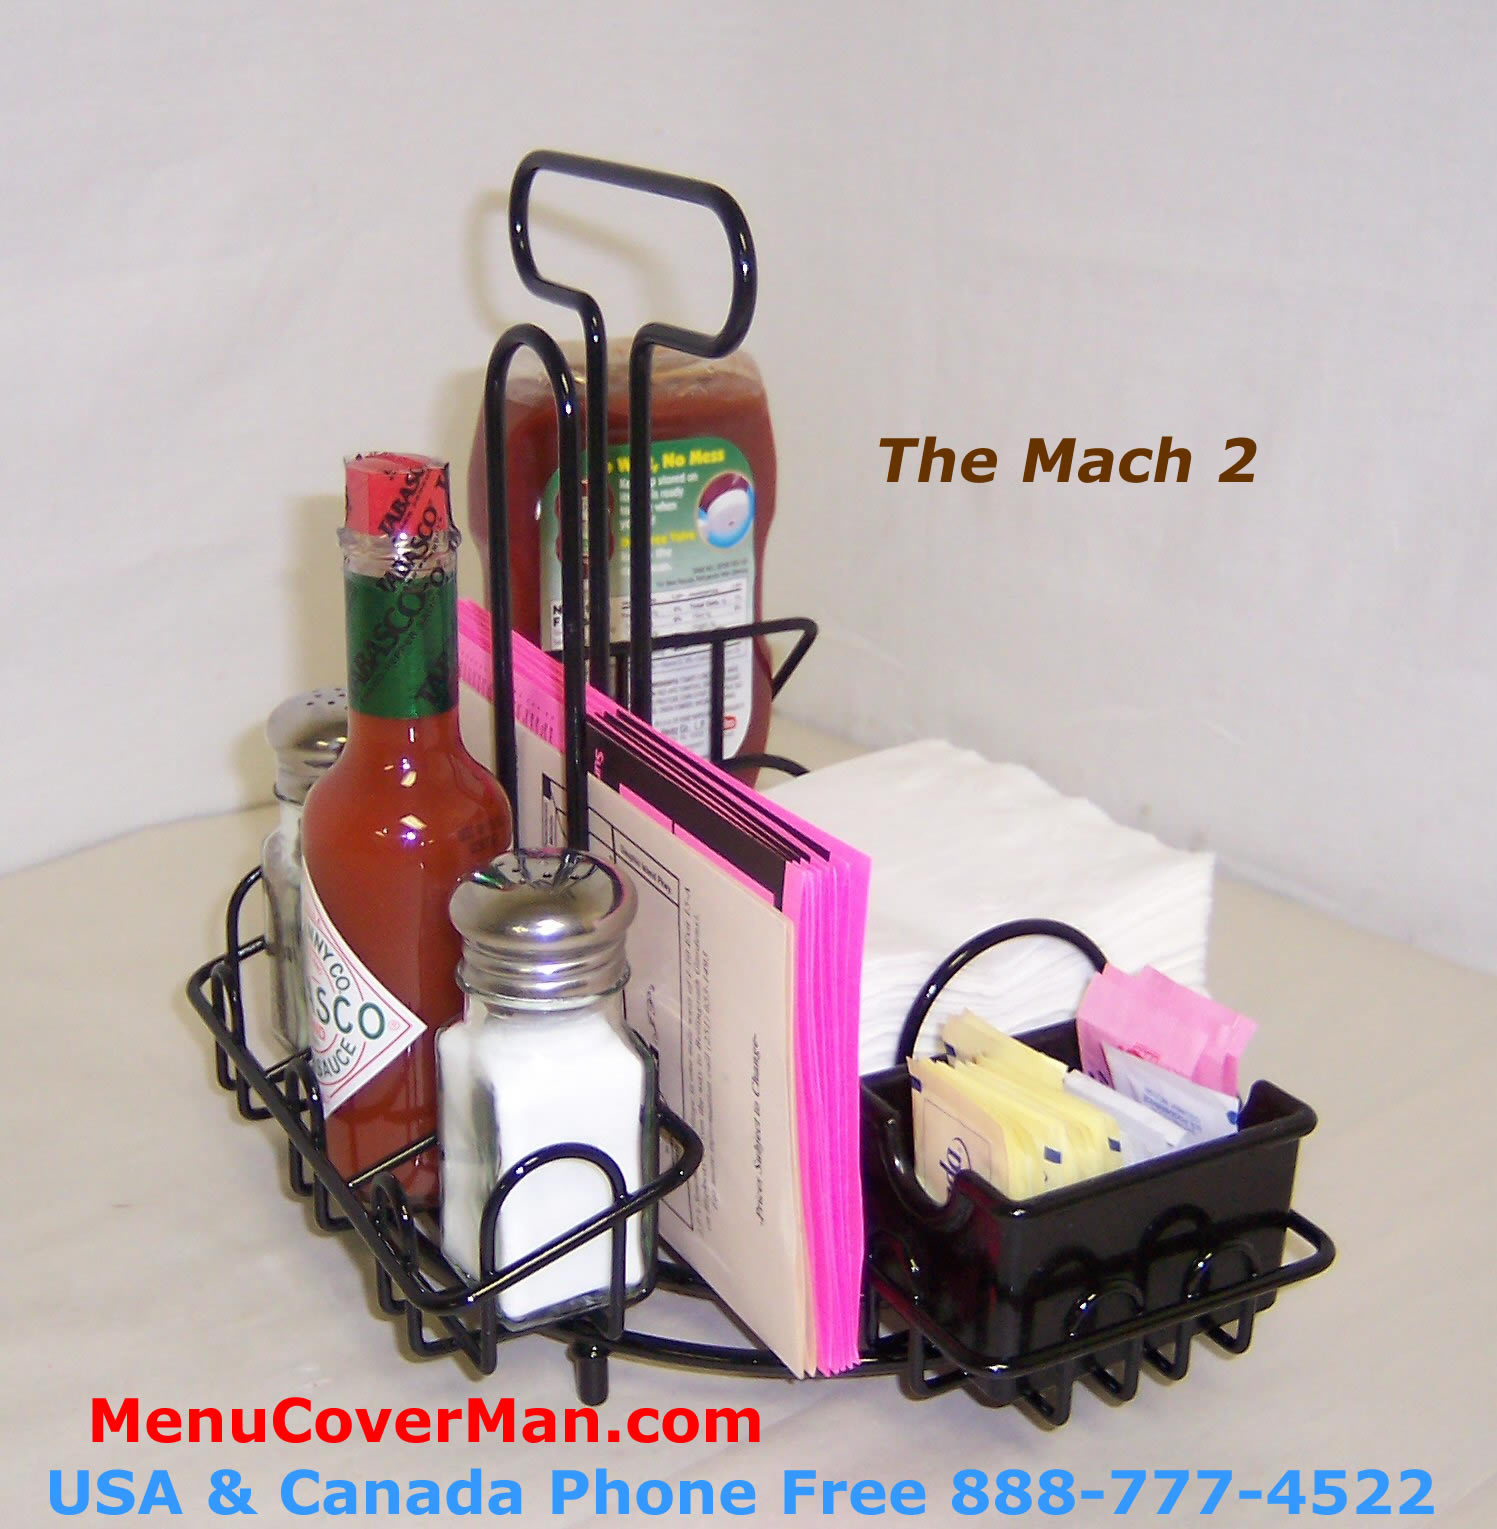 Condiment and napkins caddy holder for restaurants.